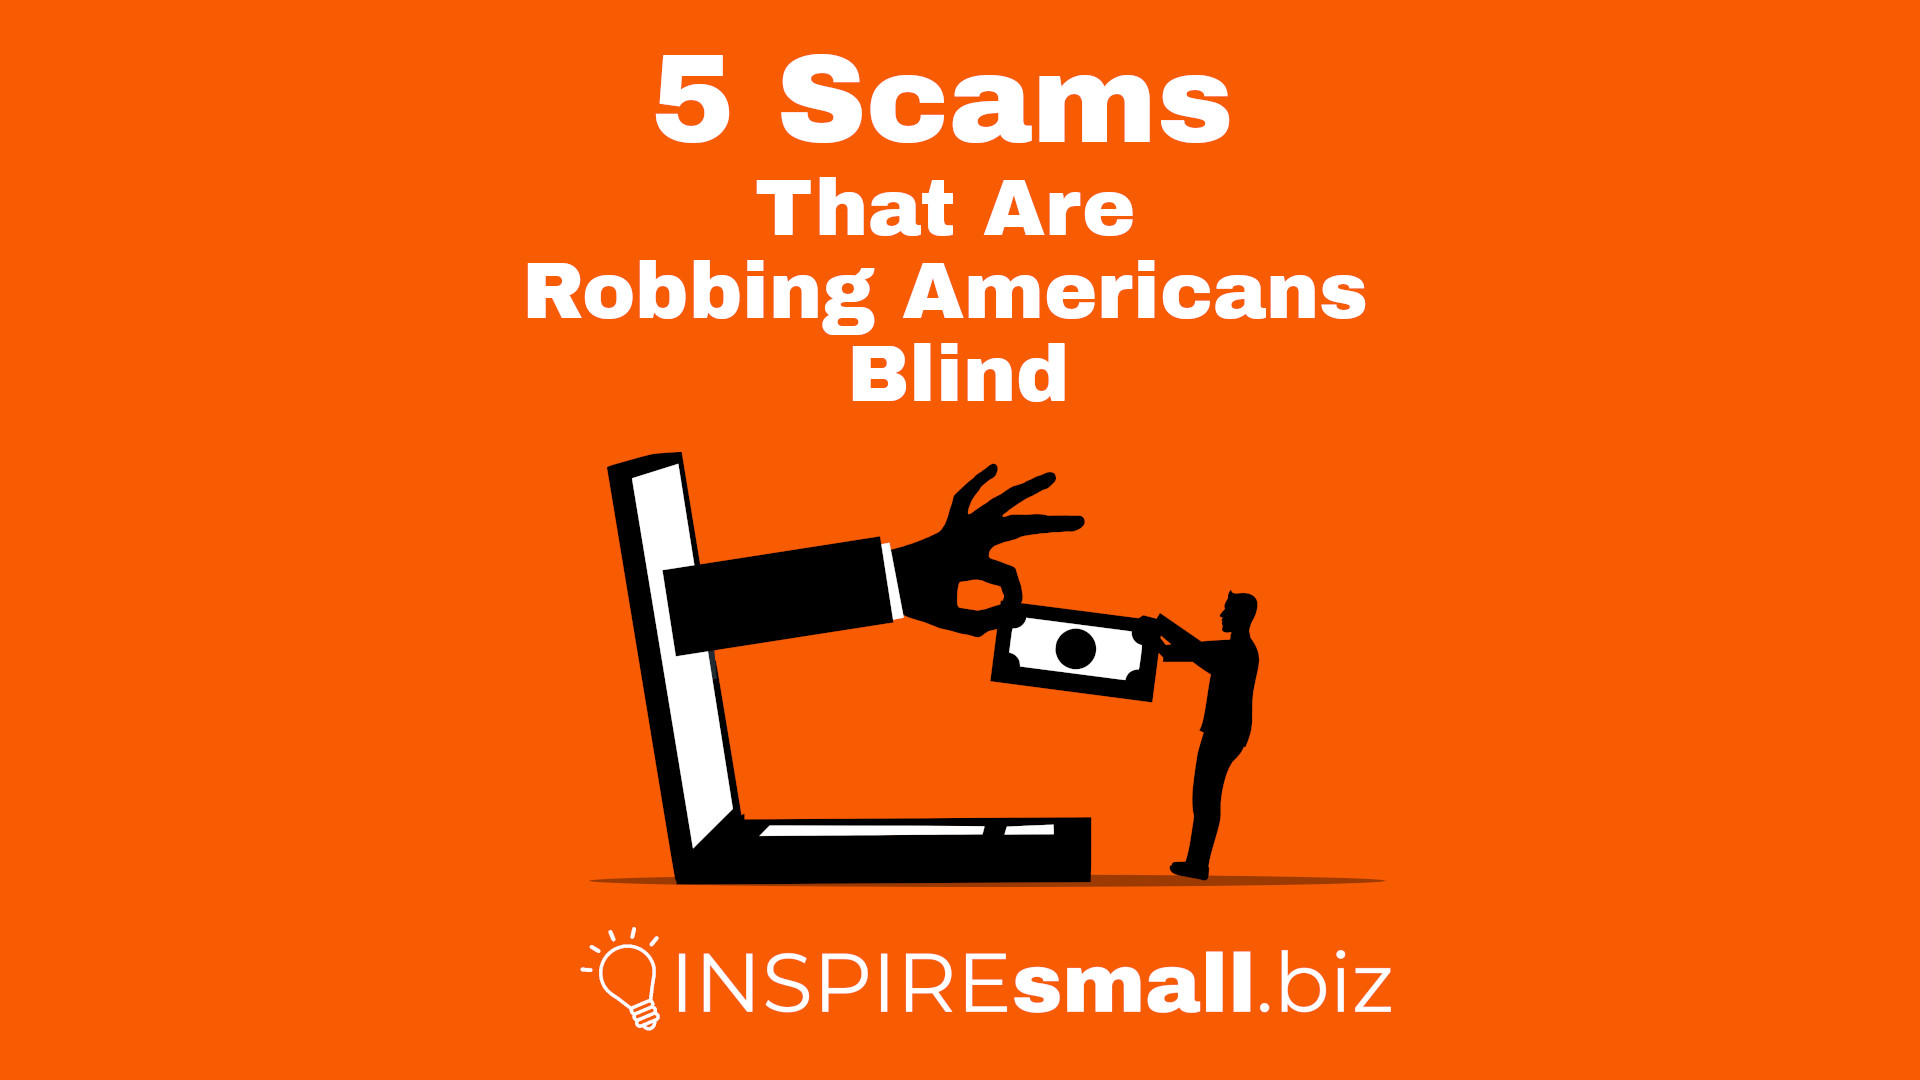 Image of a person's silhouette holding onto a dollar that is being pulled away by a hand coming out of a laptop screen with the text '5 scams that are robbing Americans blind'